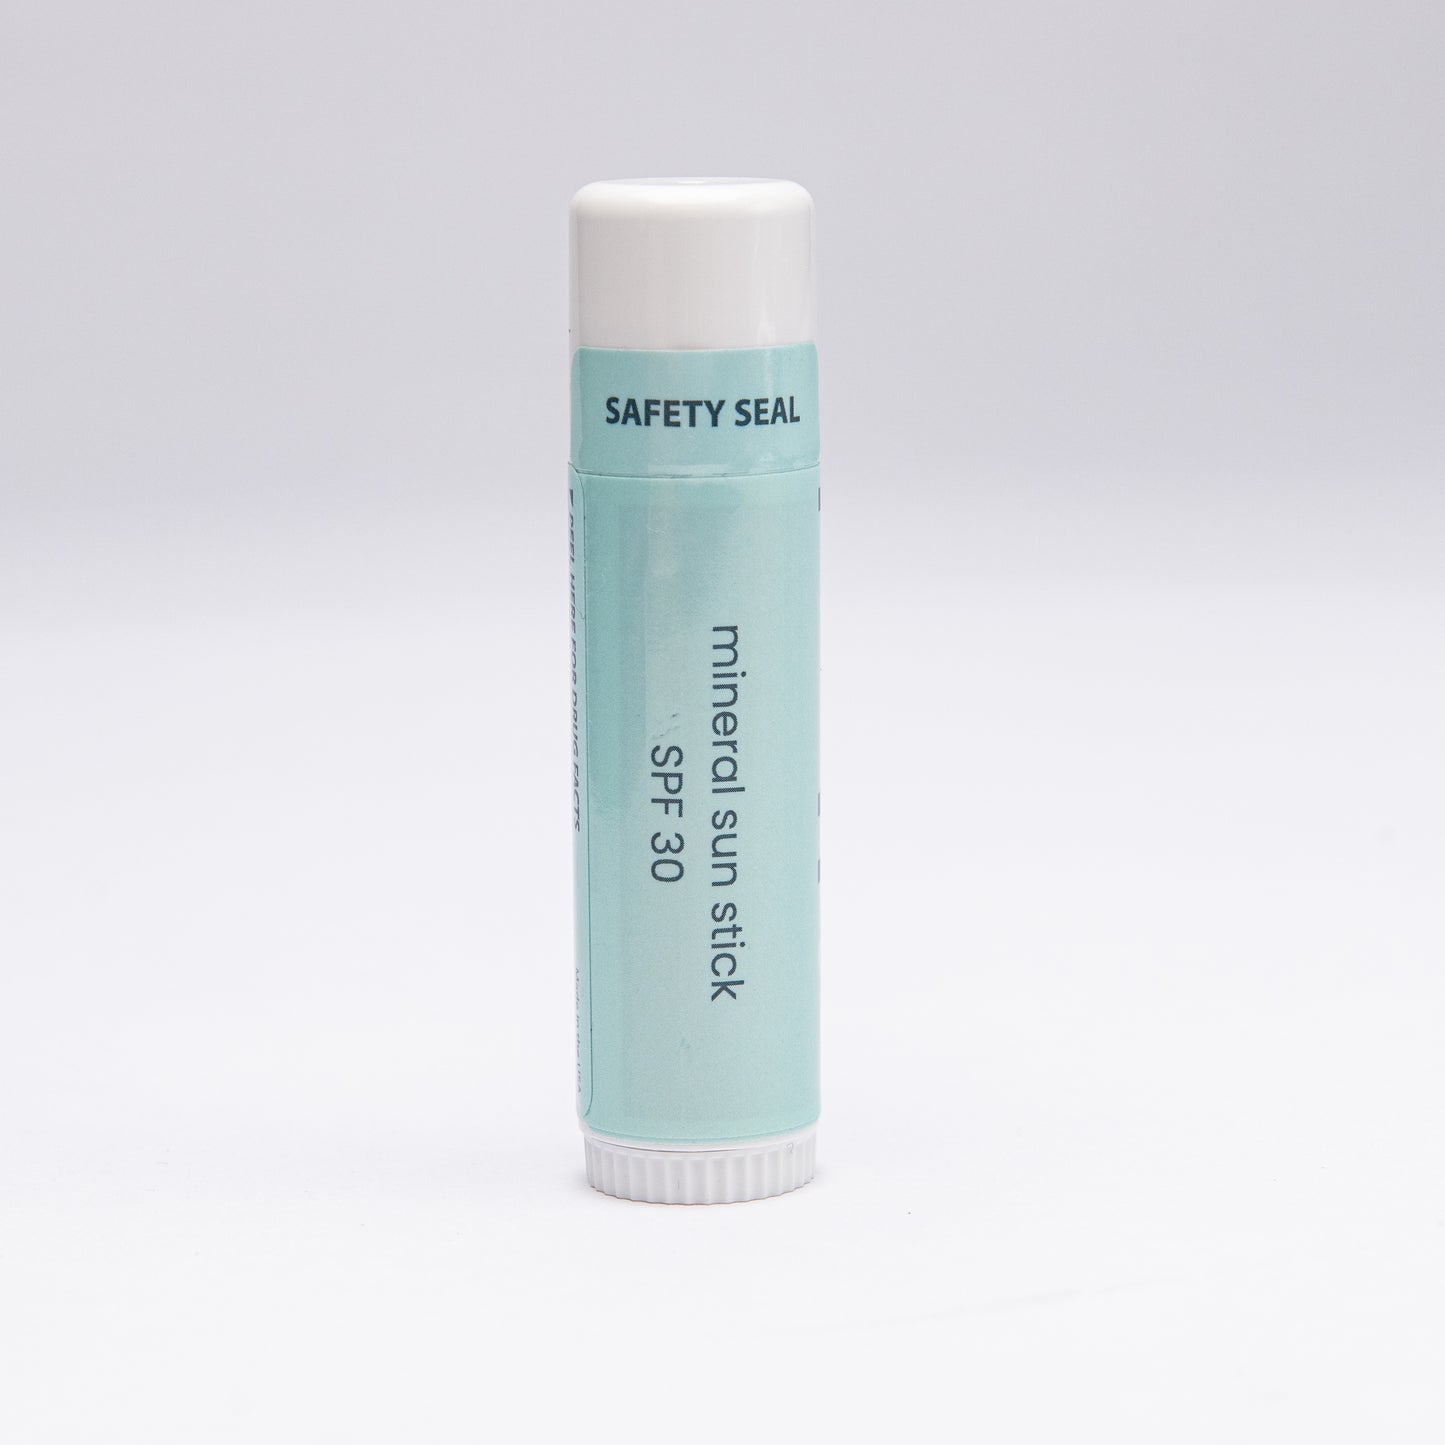 Mineral Sun Stick SPF 30 with Safety Seal